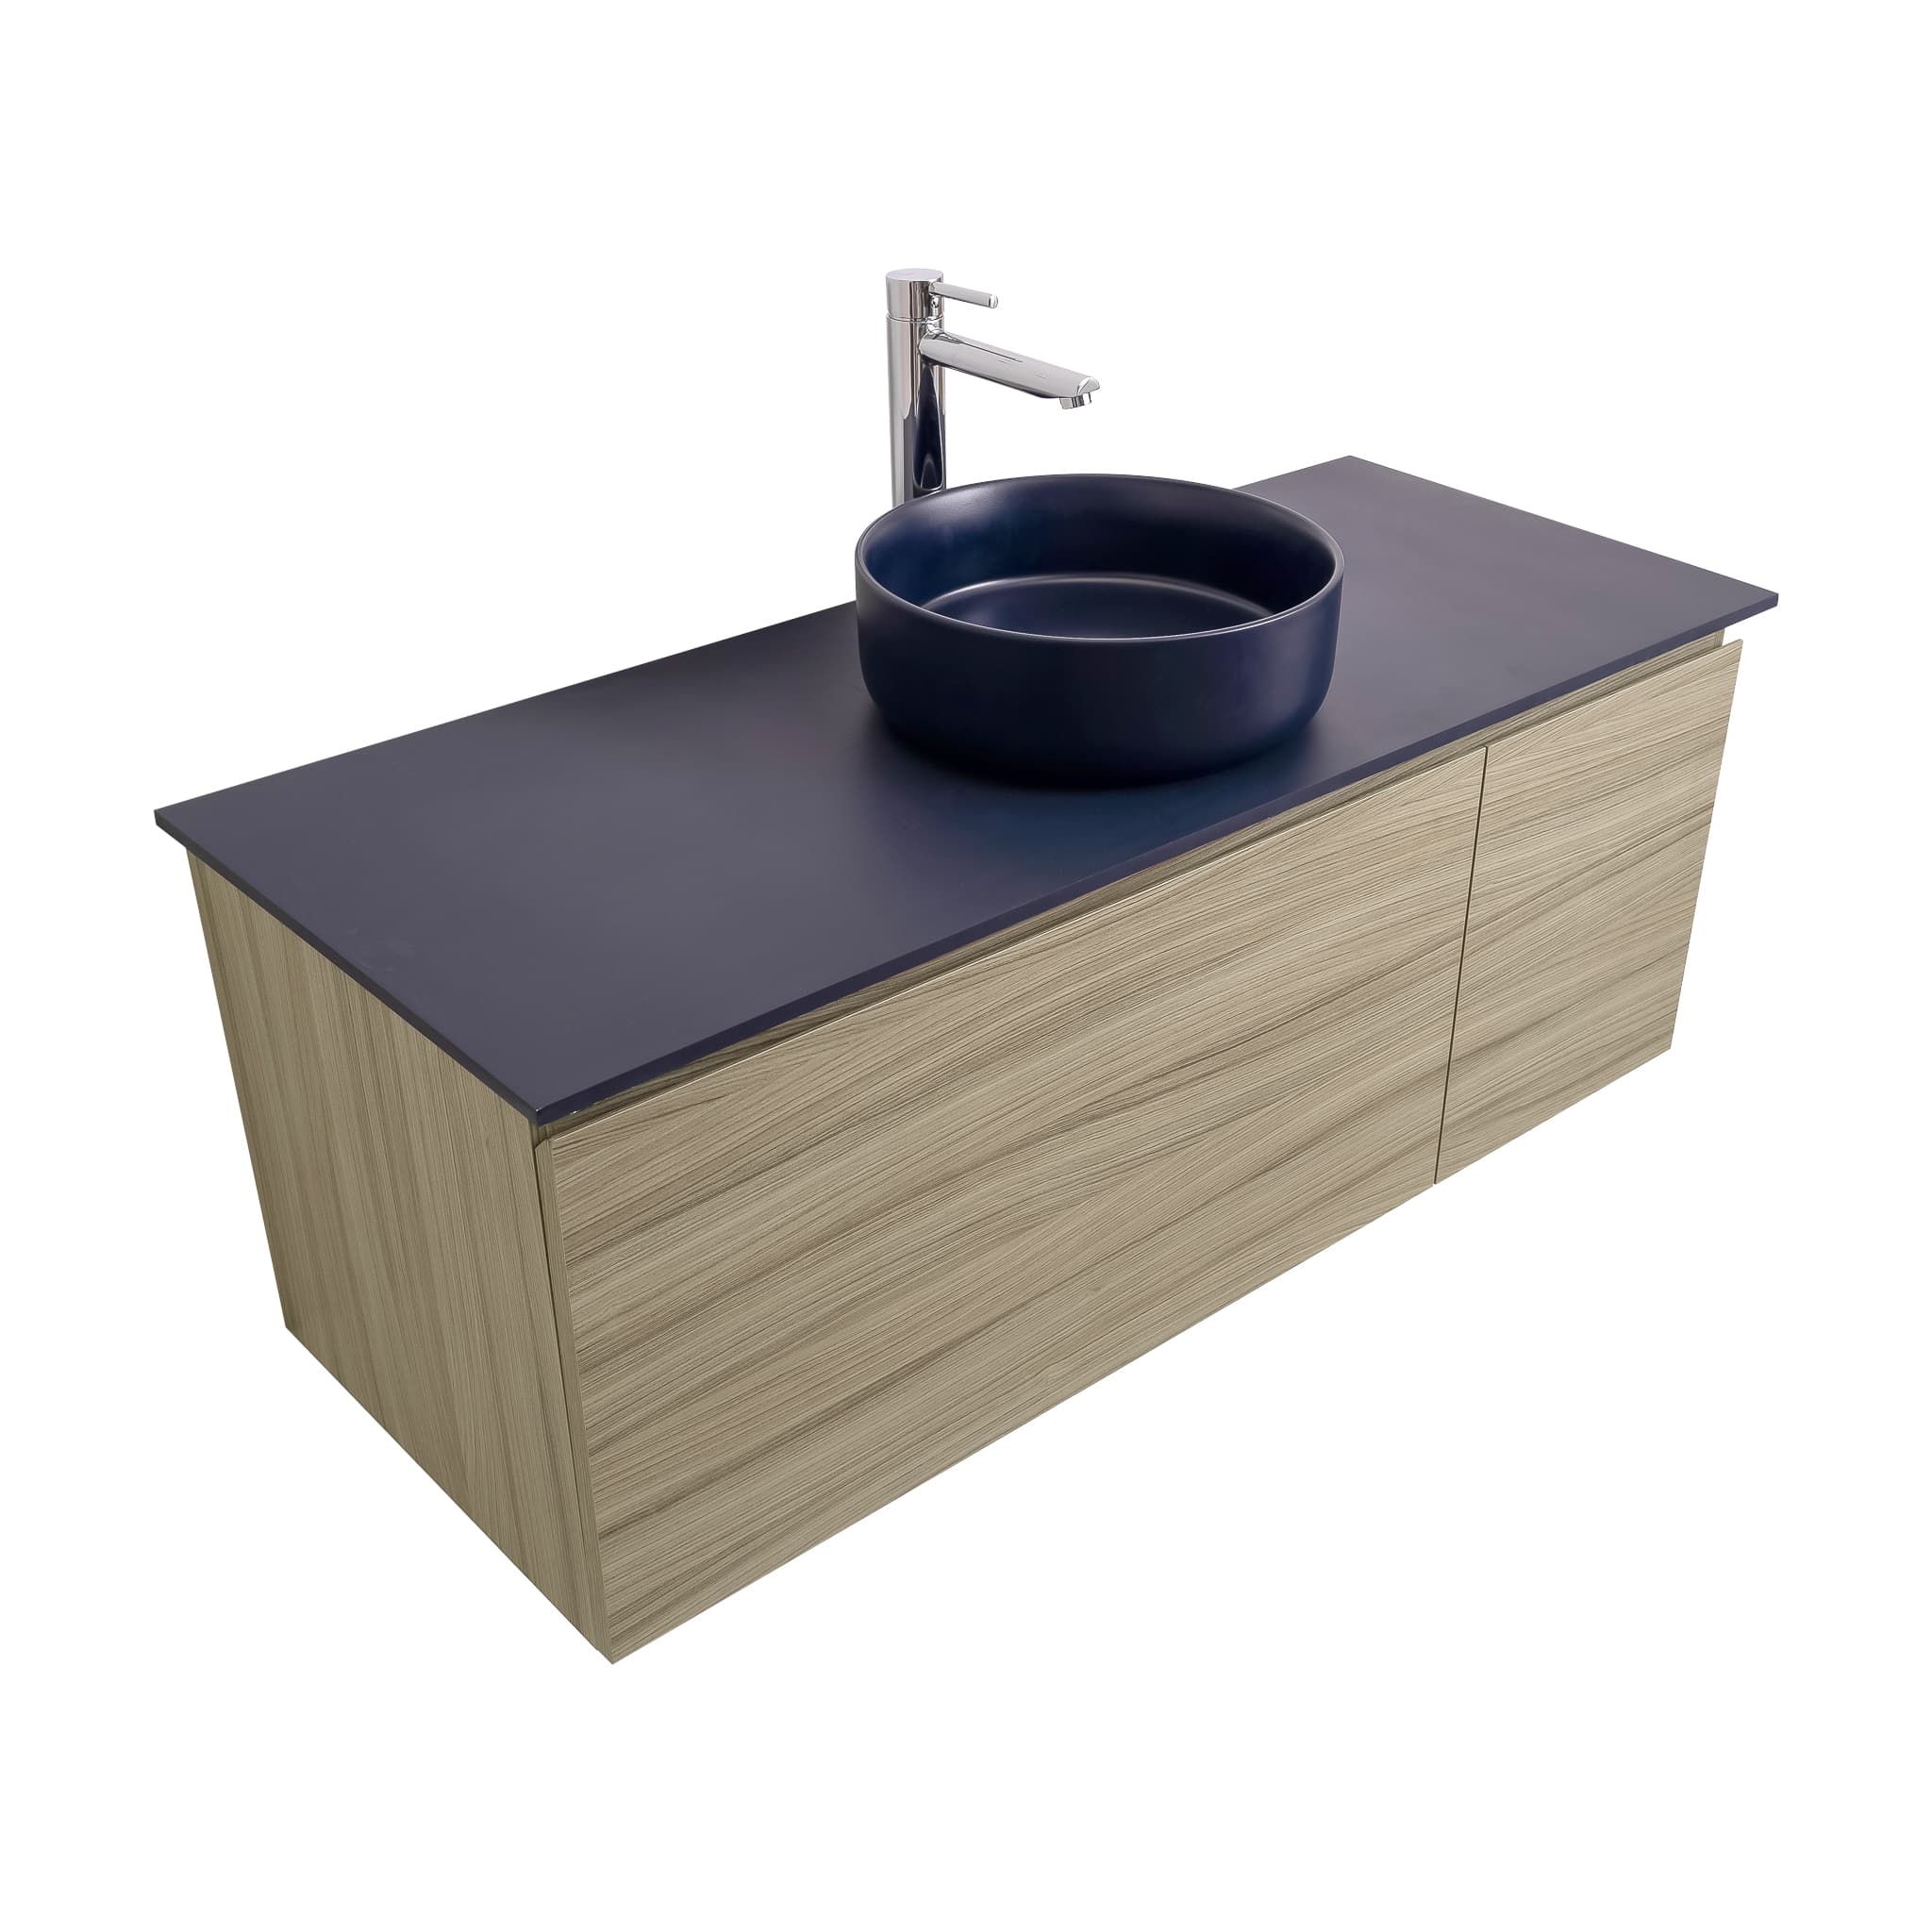 Venice 47.5 Nilo Grey Wood Texture Cabinet, Ares Navy Blue Top And Ares Navy Blue Ceramic Basin, Wall Mounted Modern Vanity Set